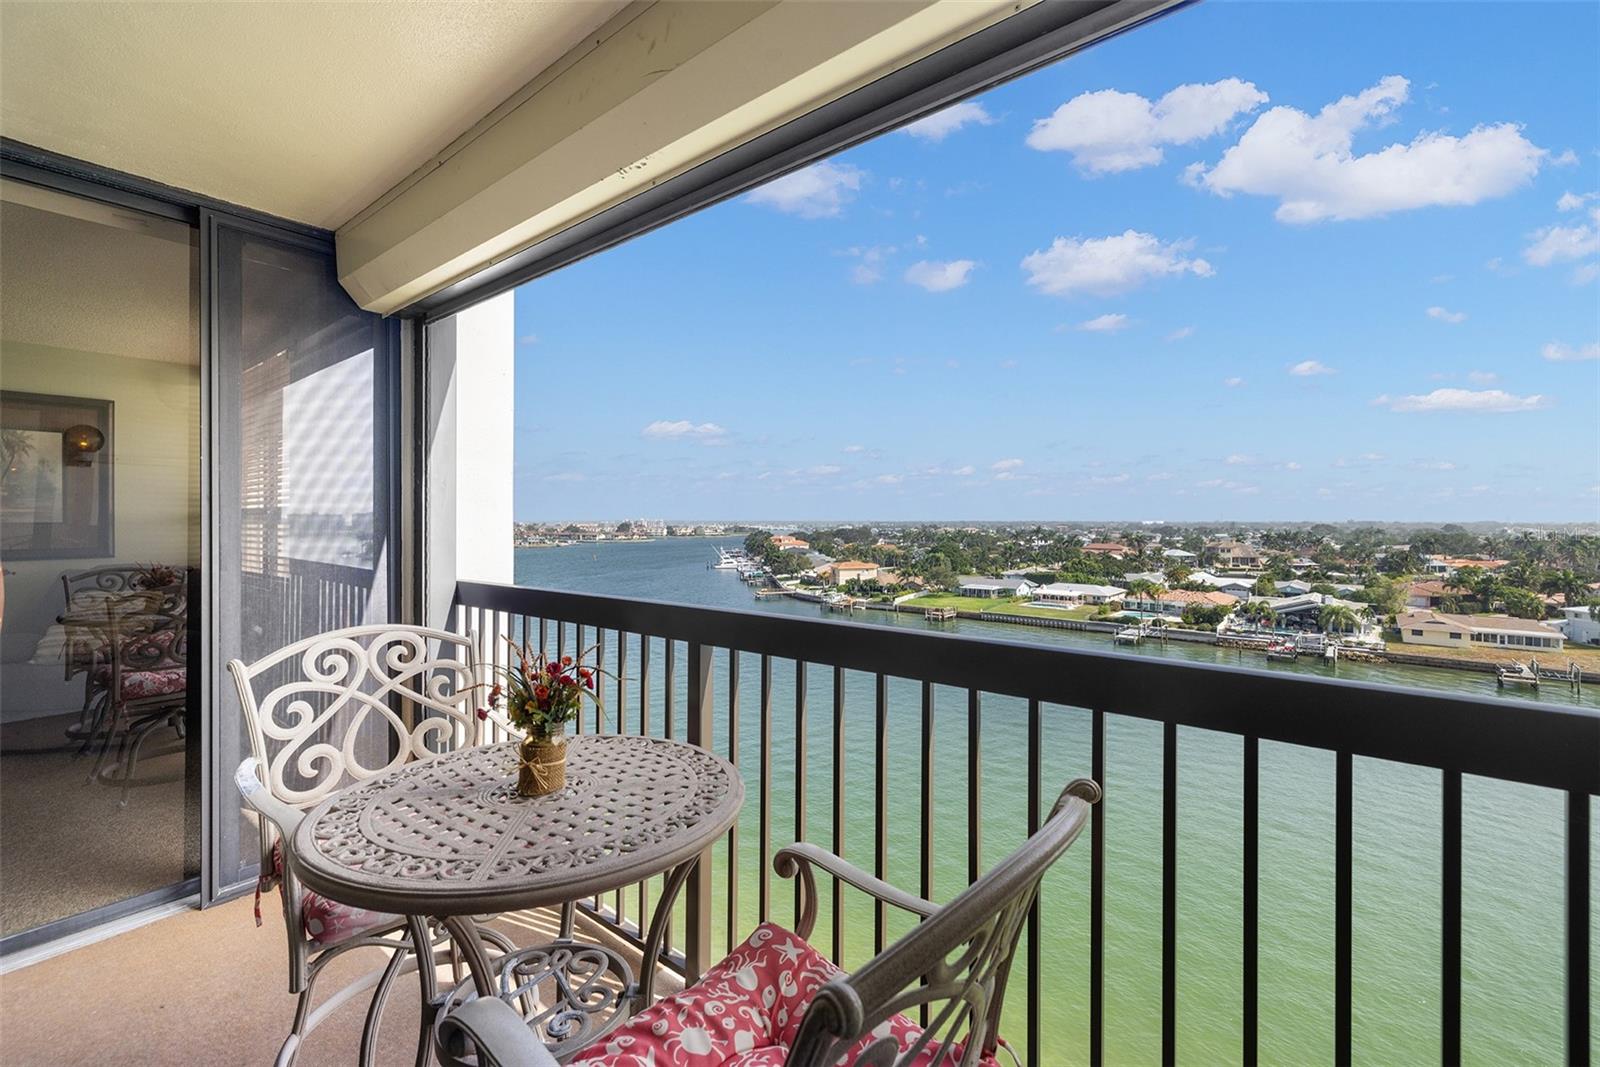 Balcony view of the Intracoastal Waterway